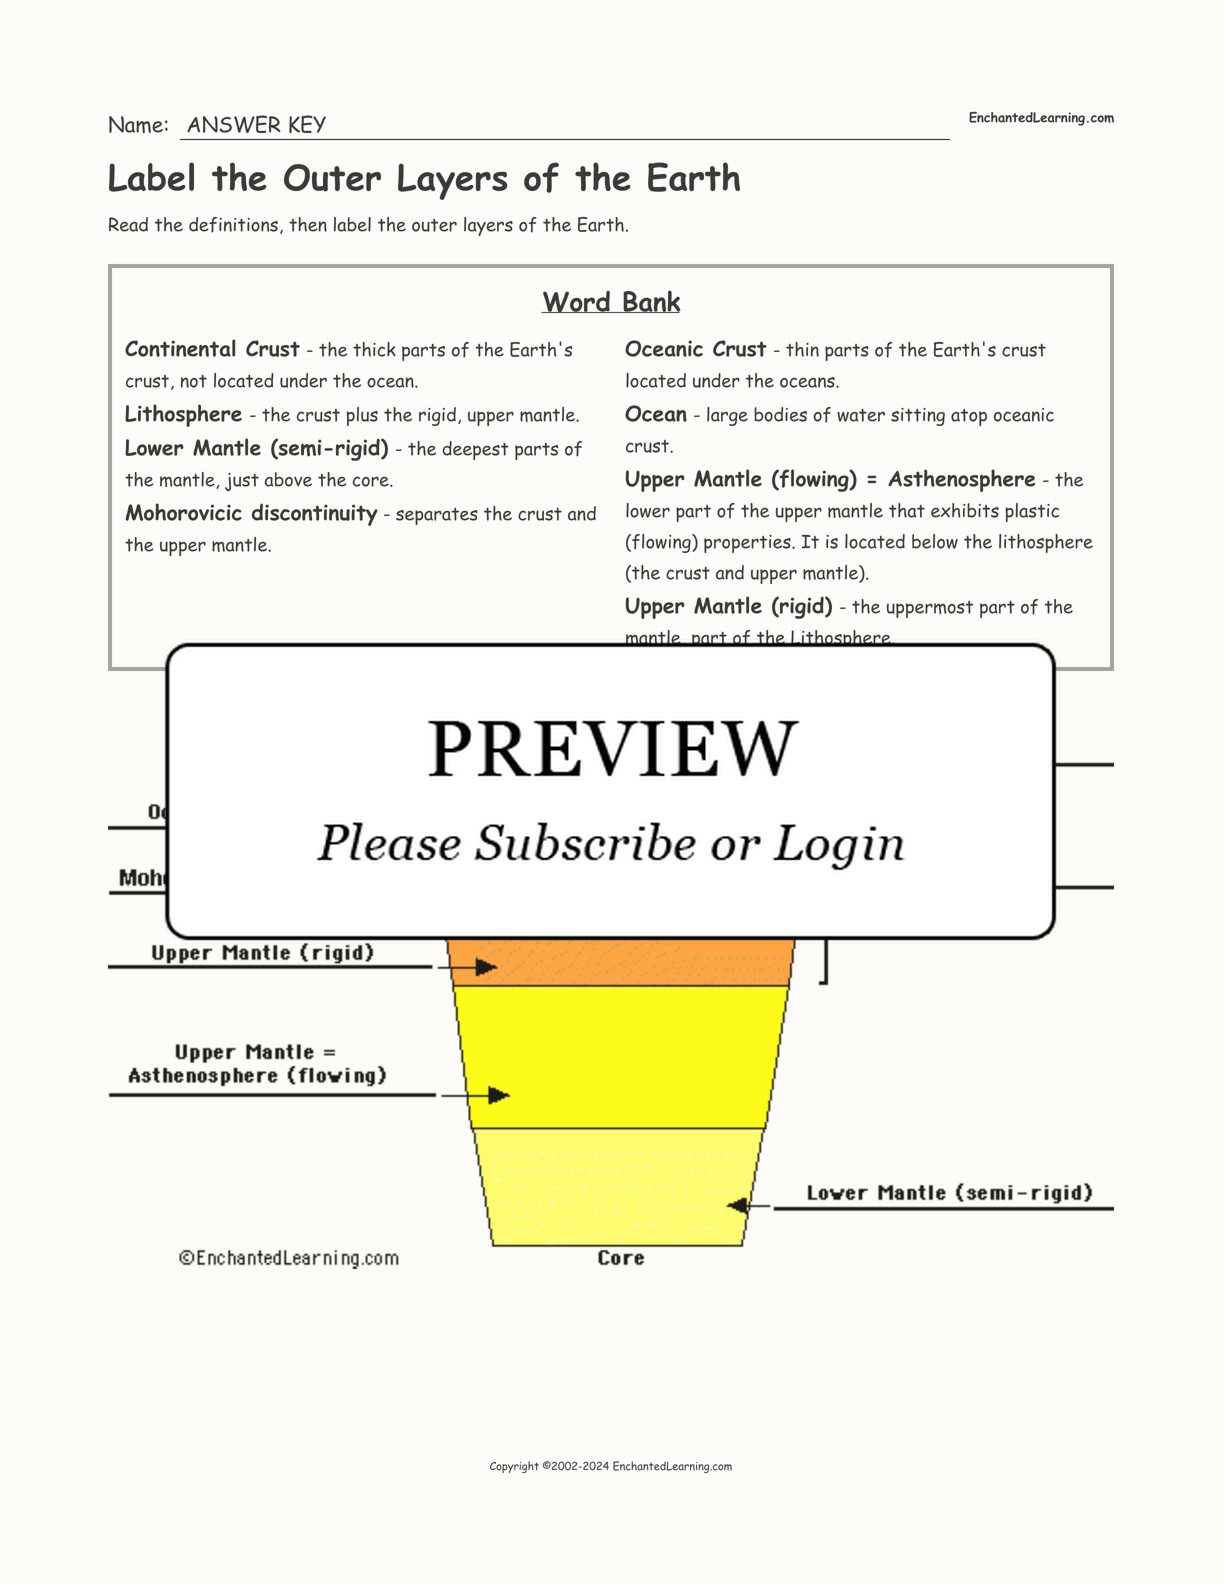 Label the Outer Layers of the Earth interactive worksheet page 2